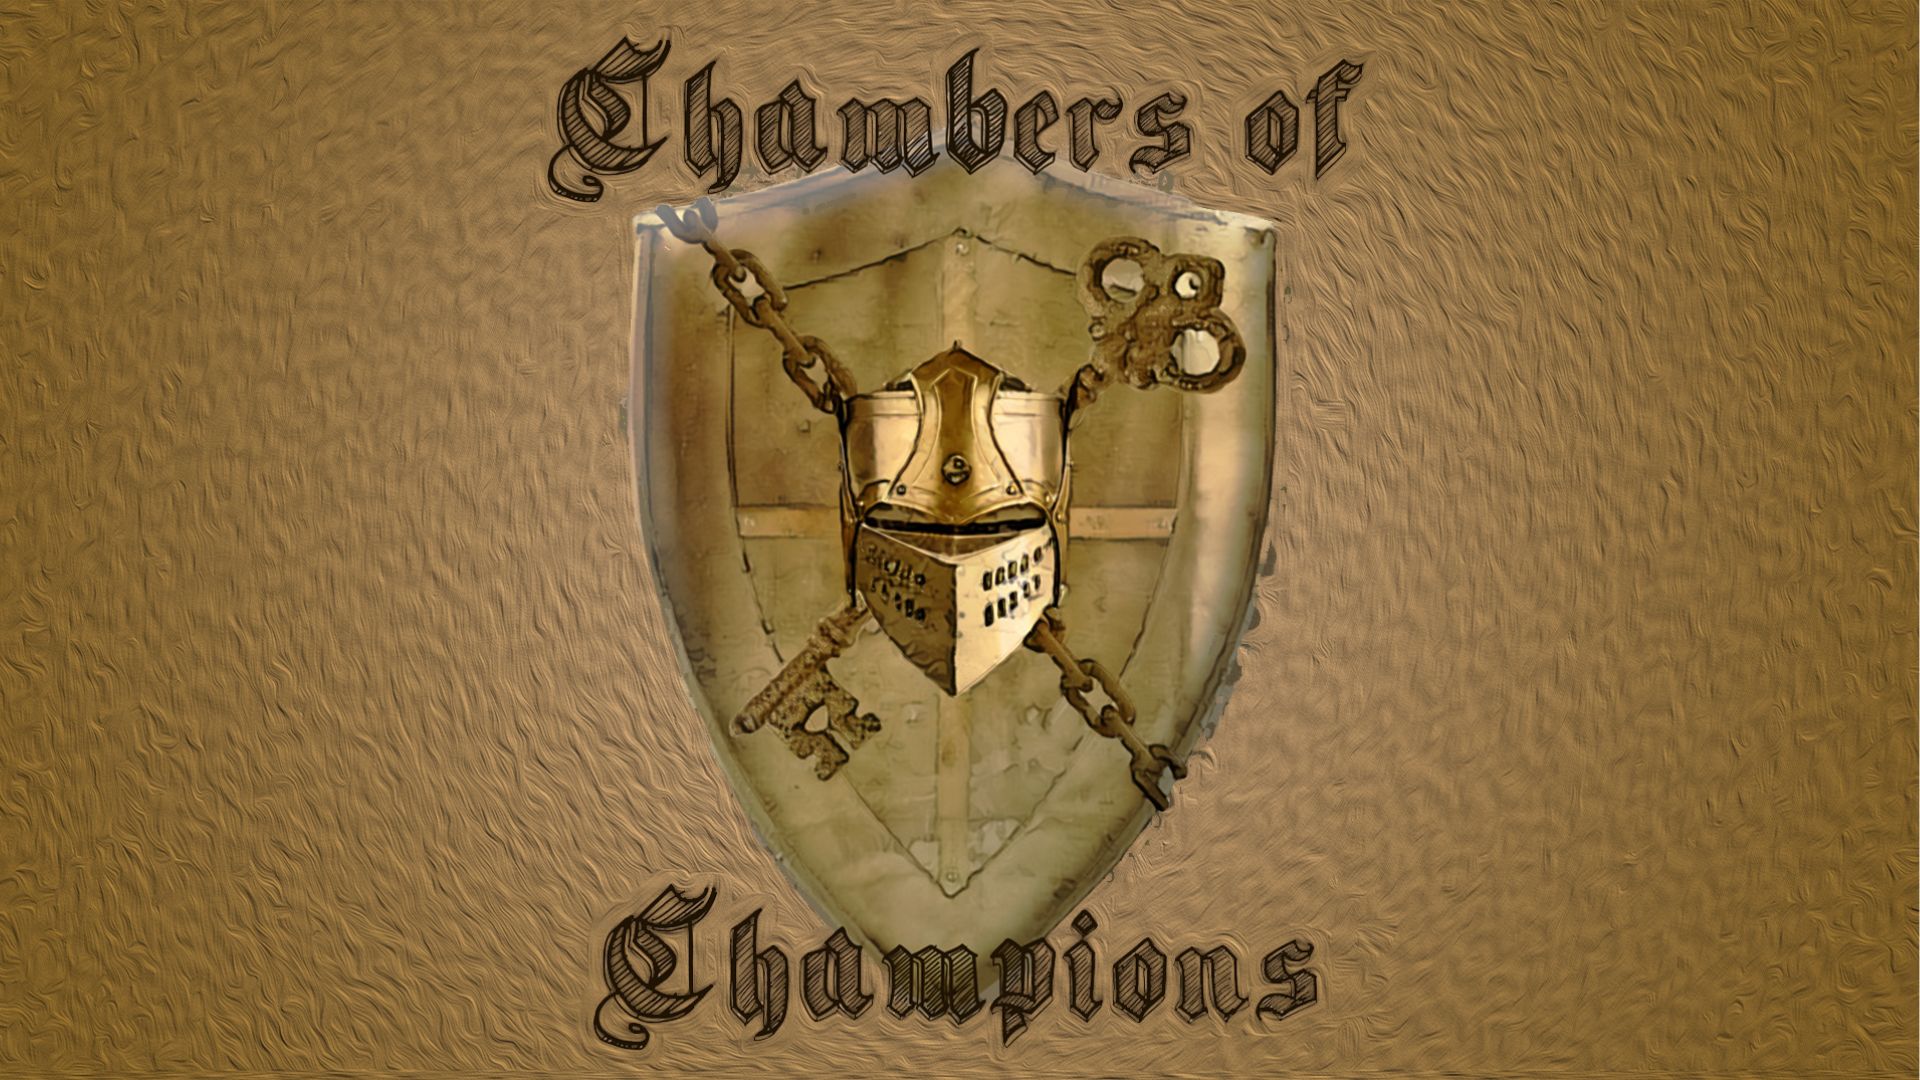 3 persons - Chambers of Champions